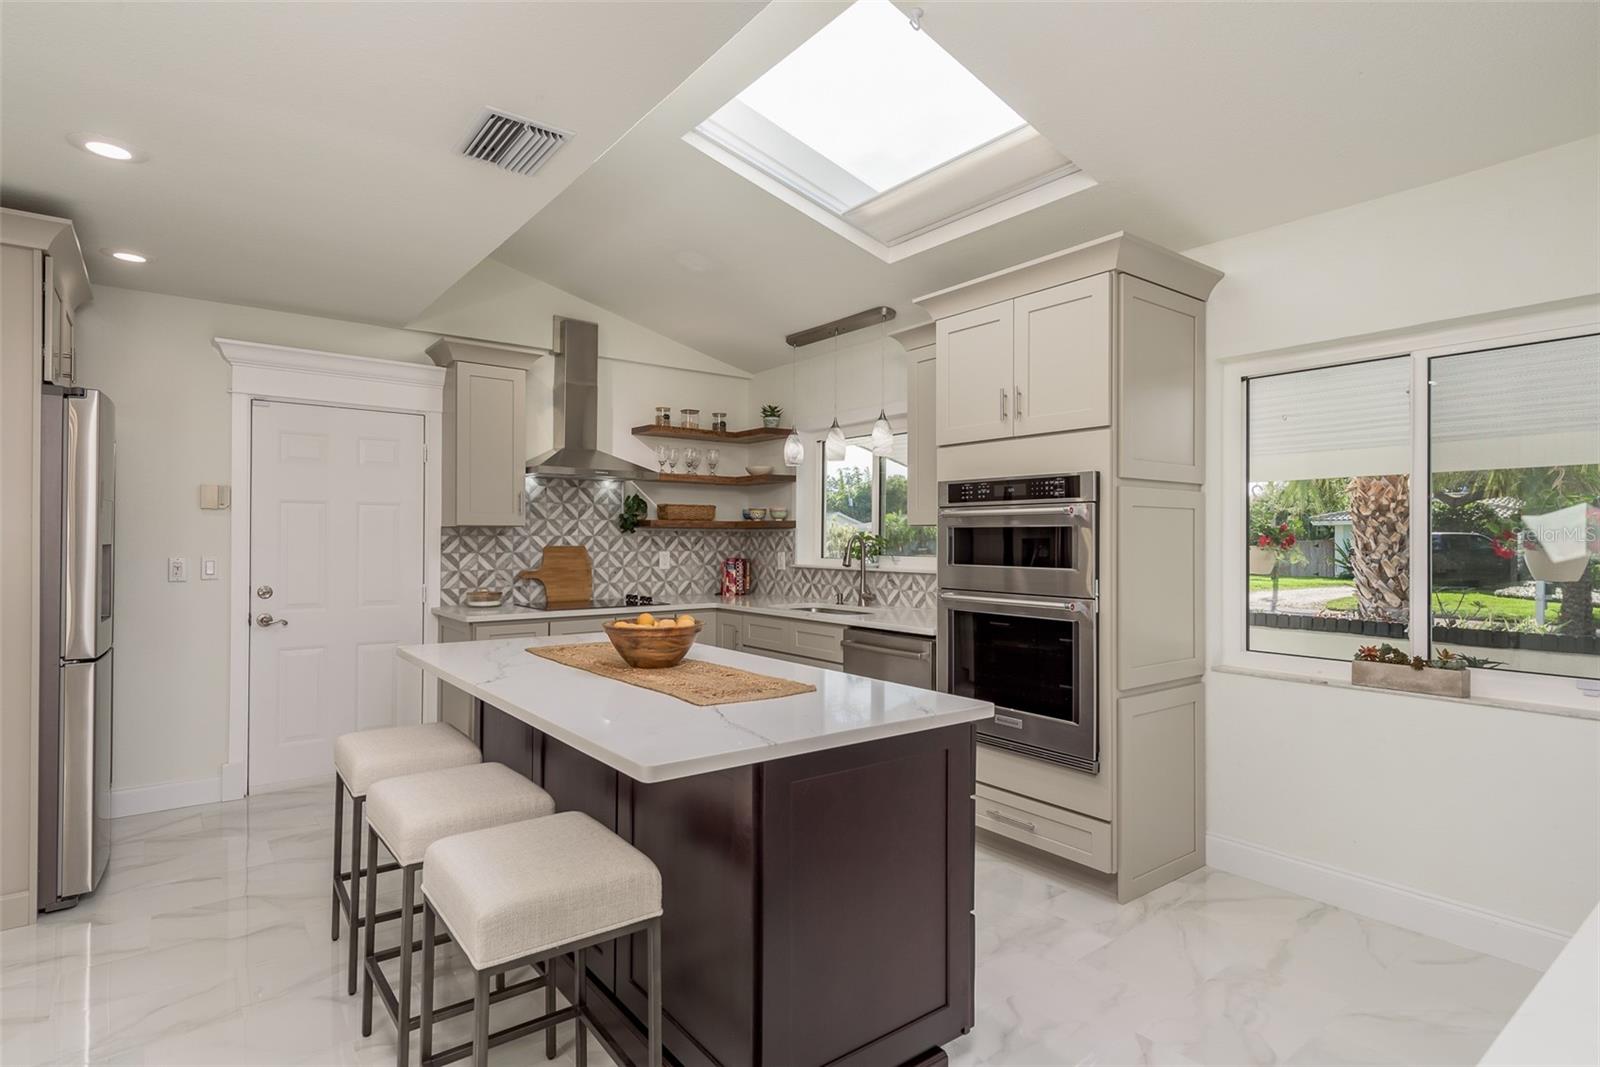 Updated kitchen with skylight